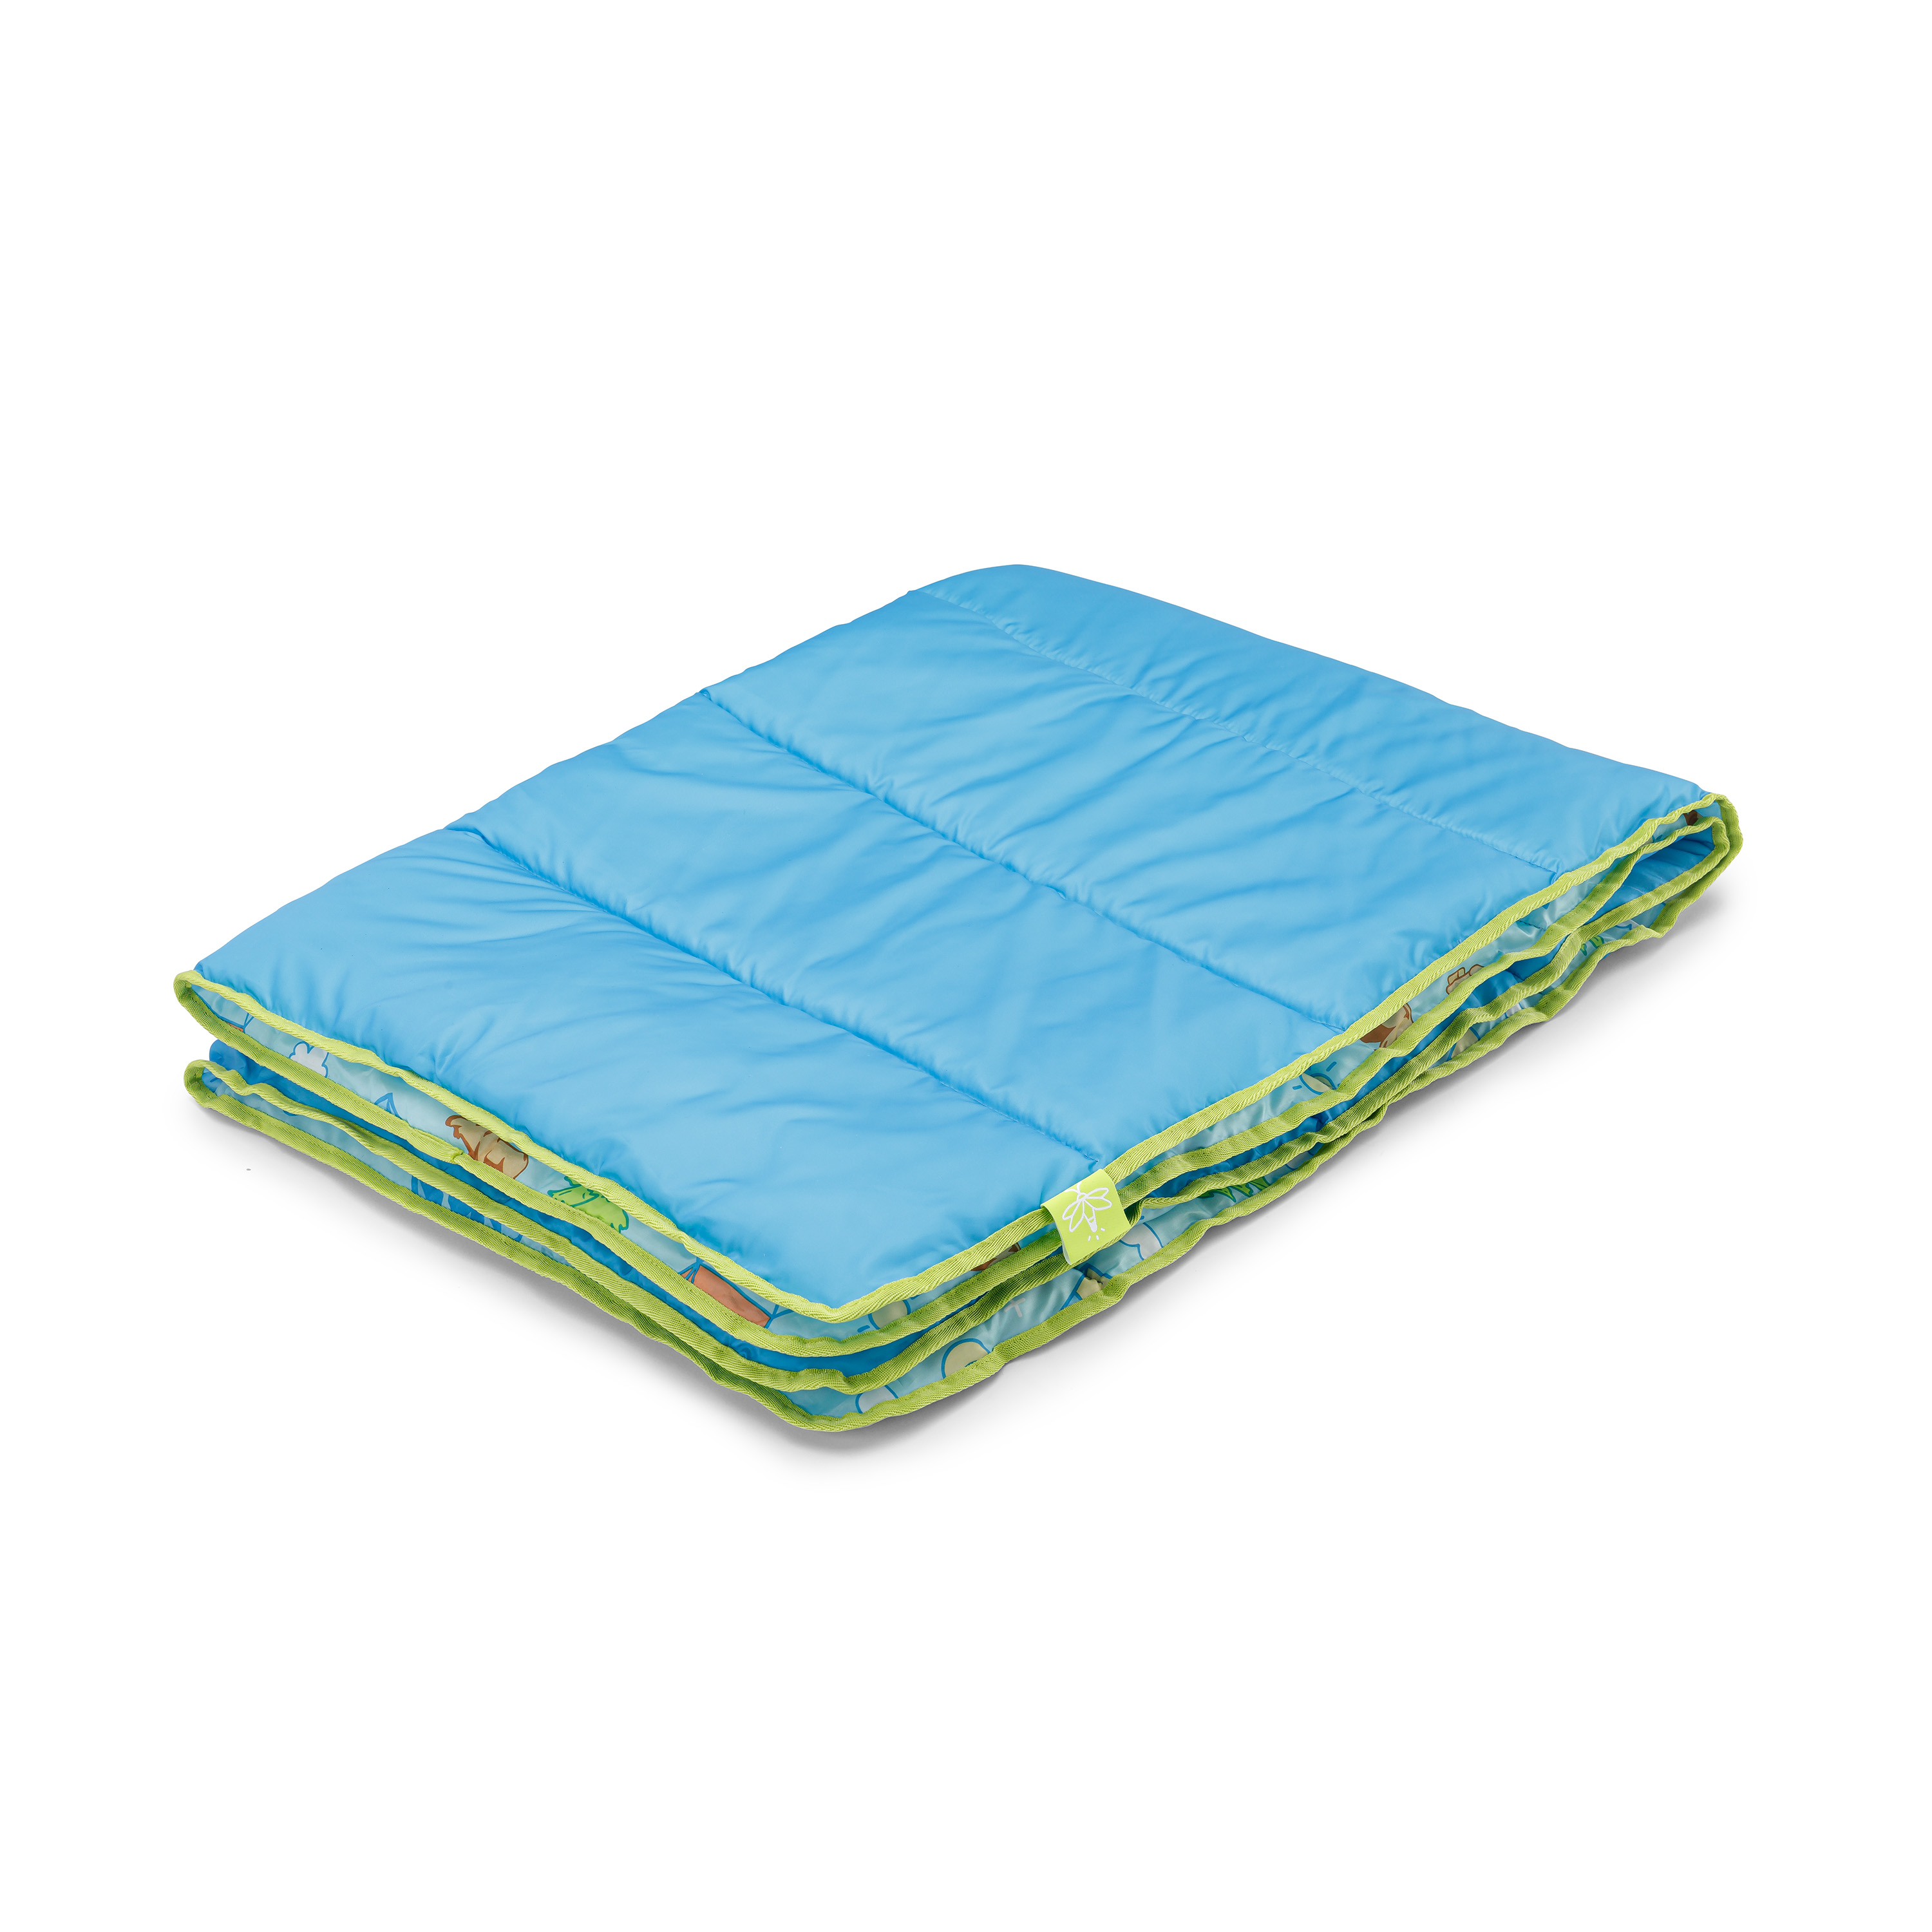 Firefly! Outdoor Gear Rectangular Youth Camp Blanket - Blue (60 in. x 40 in.) - image 2 of 15